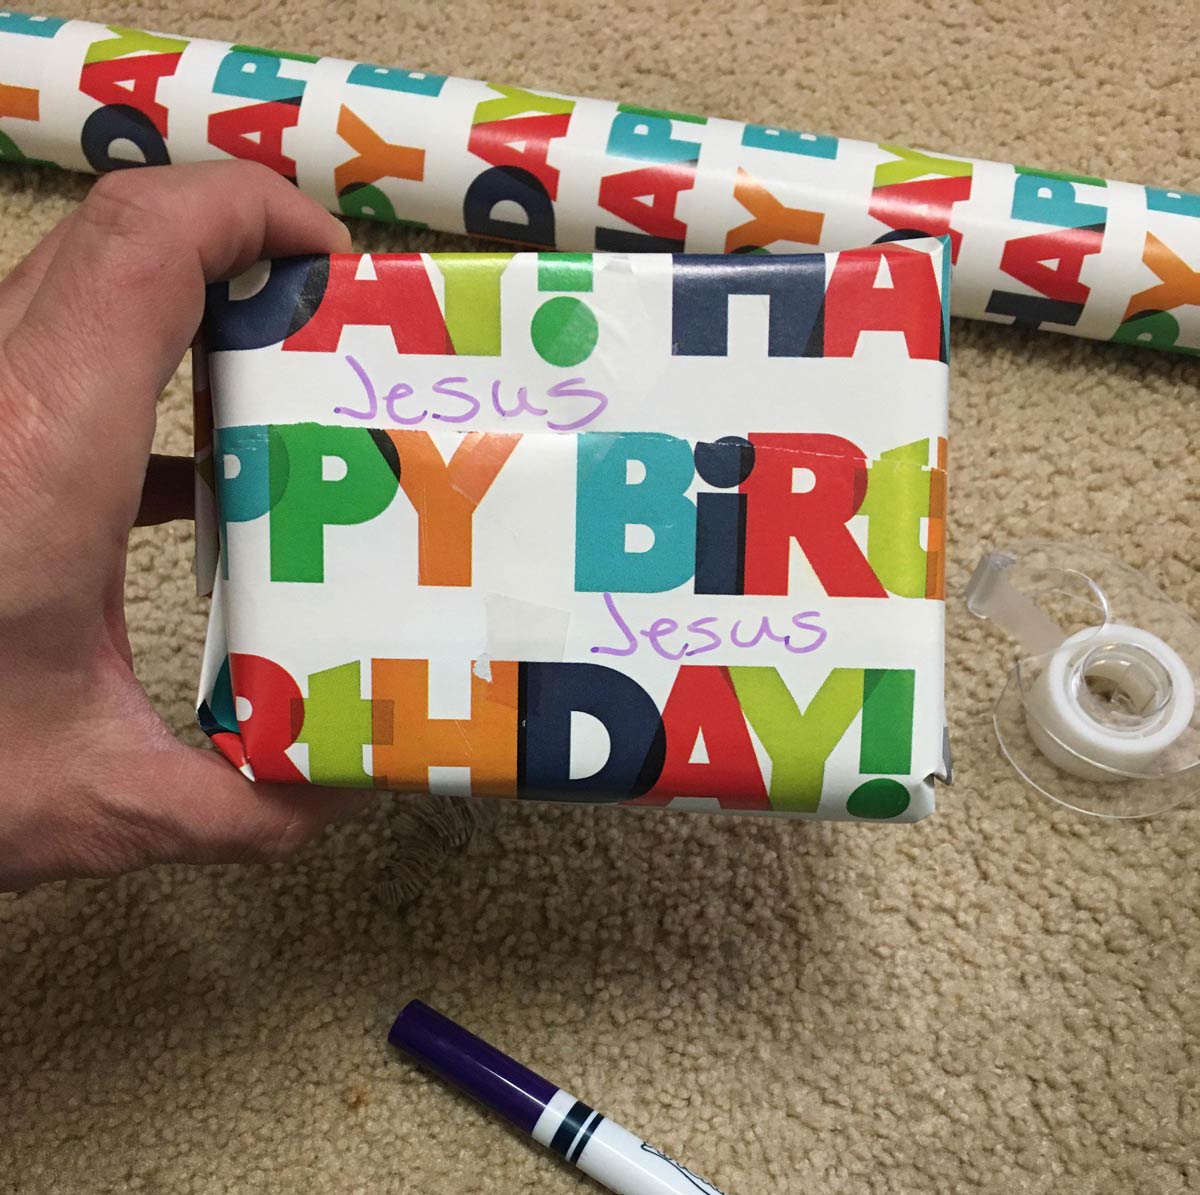 Ran out of Christmas wrapping paper. But I think I hacked it pretty well